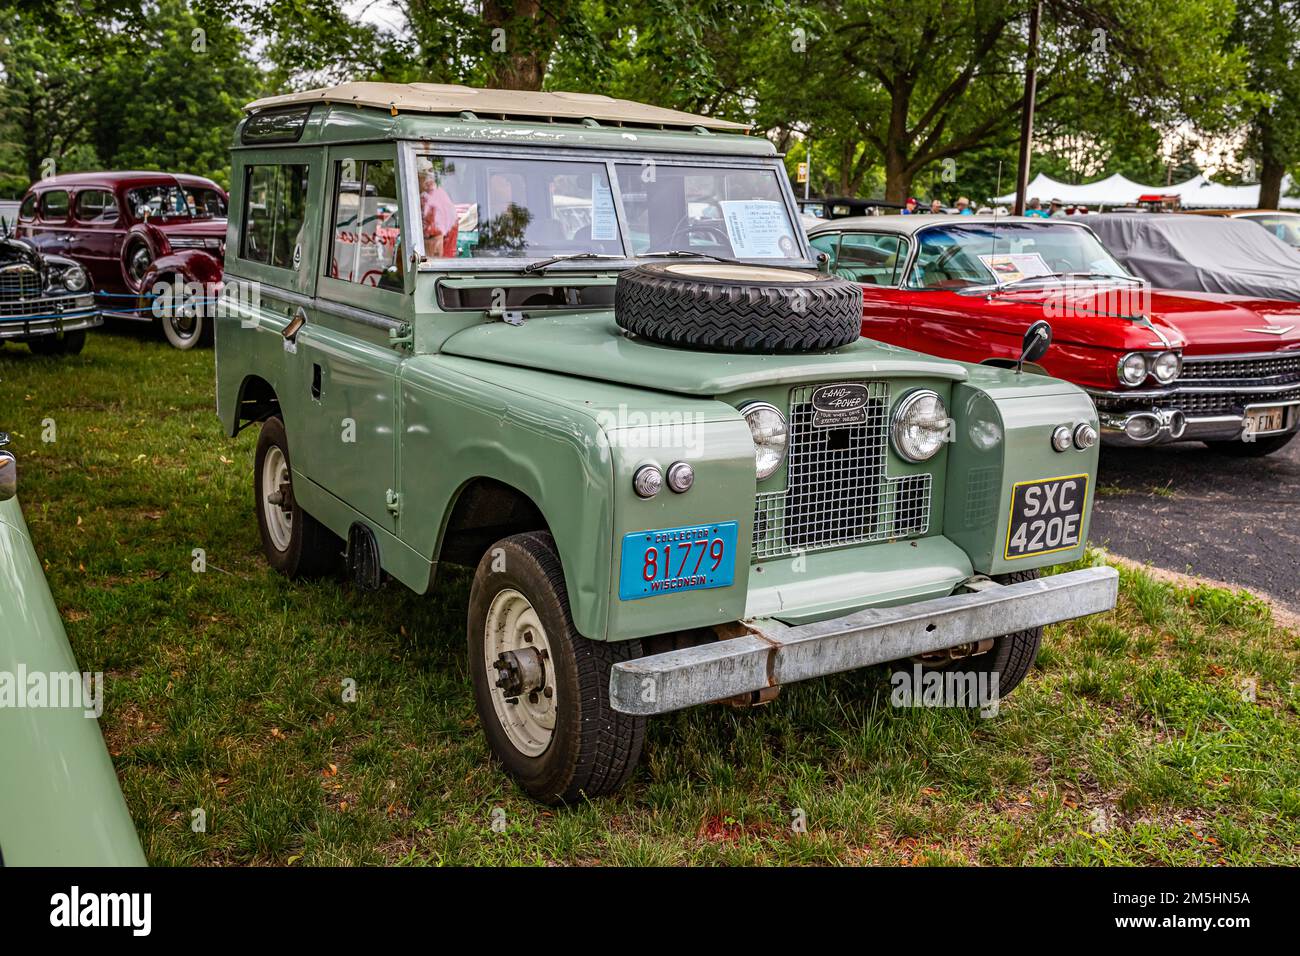 Iola, WI - July 07, 2022: High perspective front corner view of a 1967 Land Rover 88 Series IIA Station Wagon at a local car show. Stock Photo